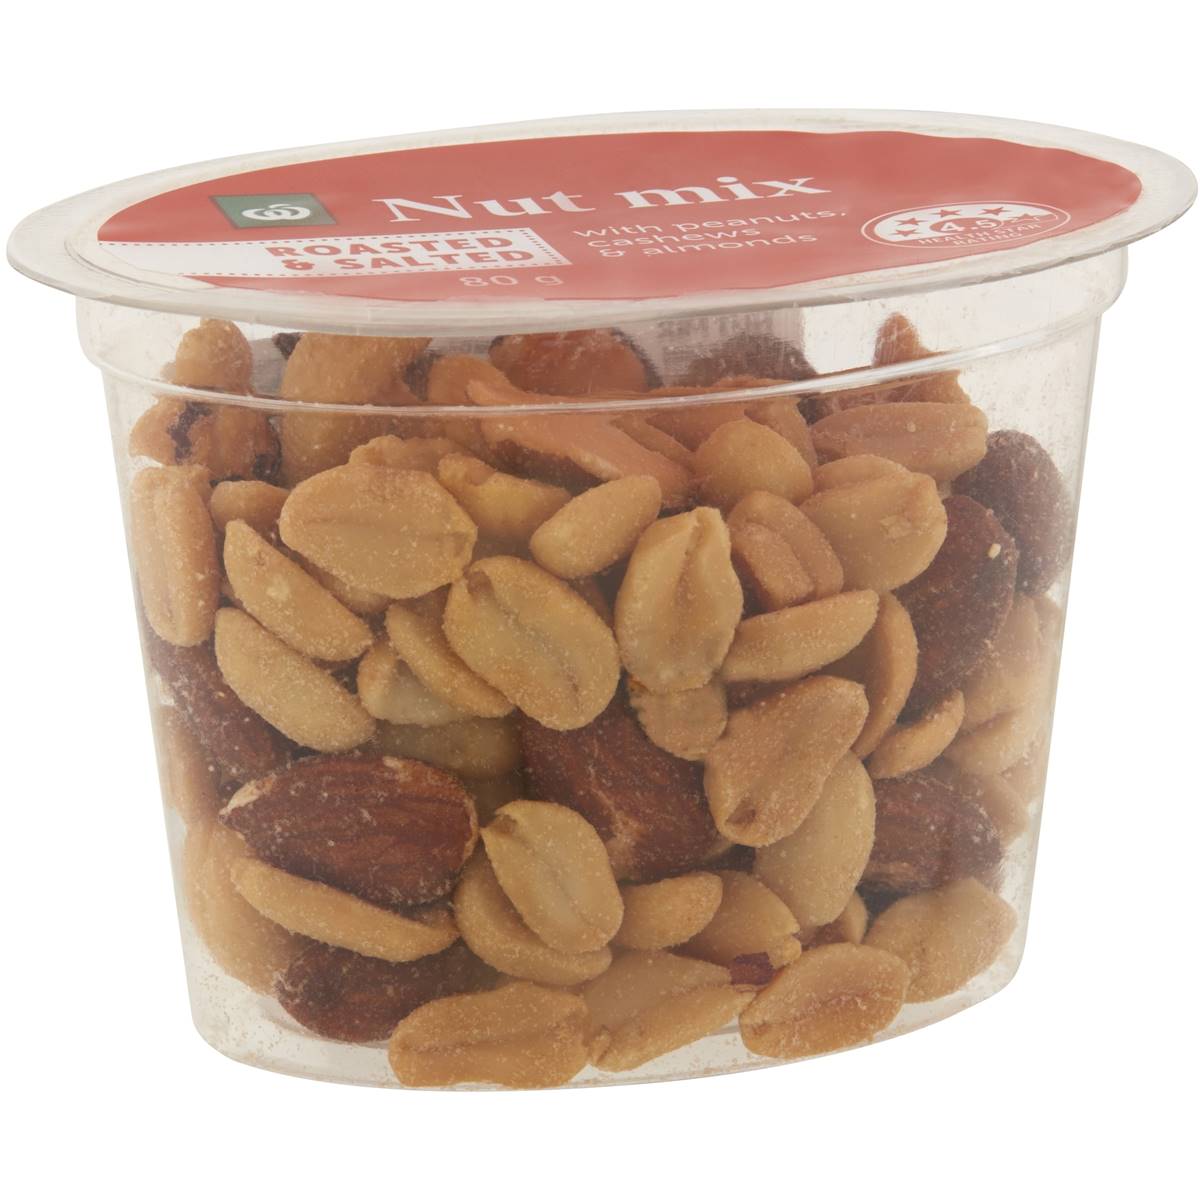 Calories in Woolworths Roasted & Salted Mixed Nuts